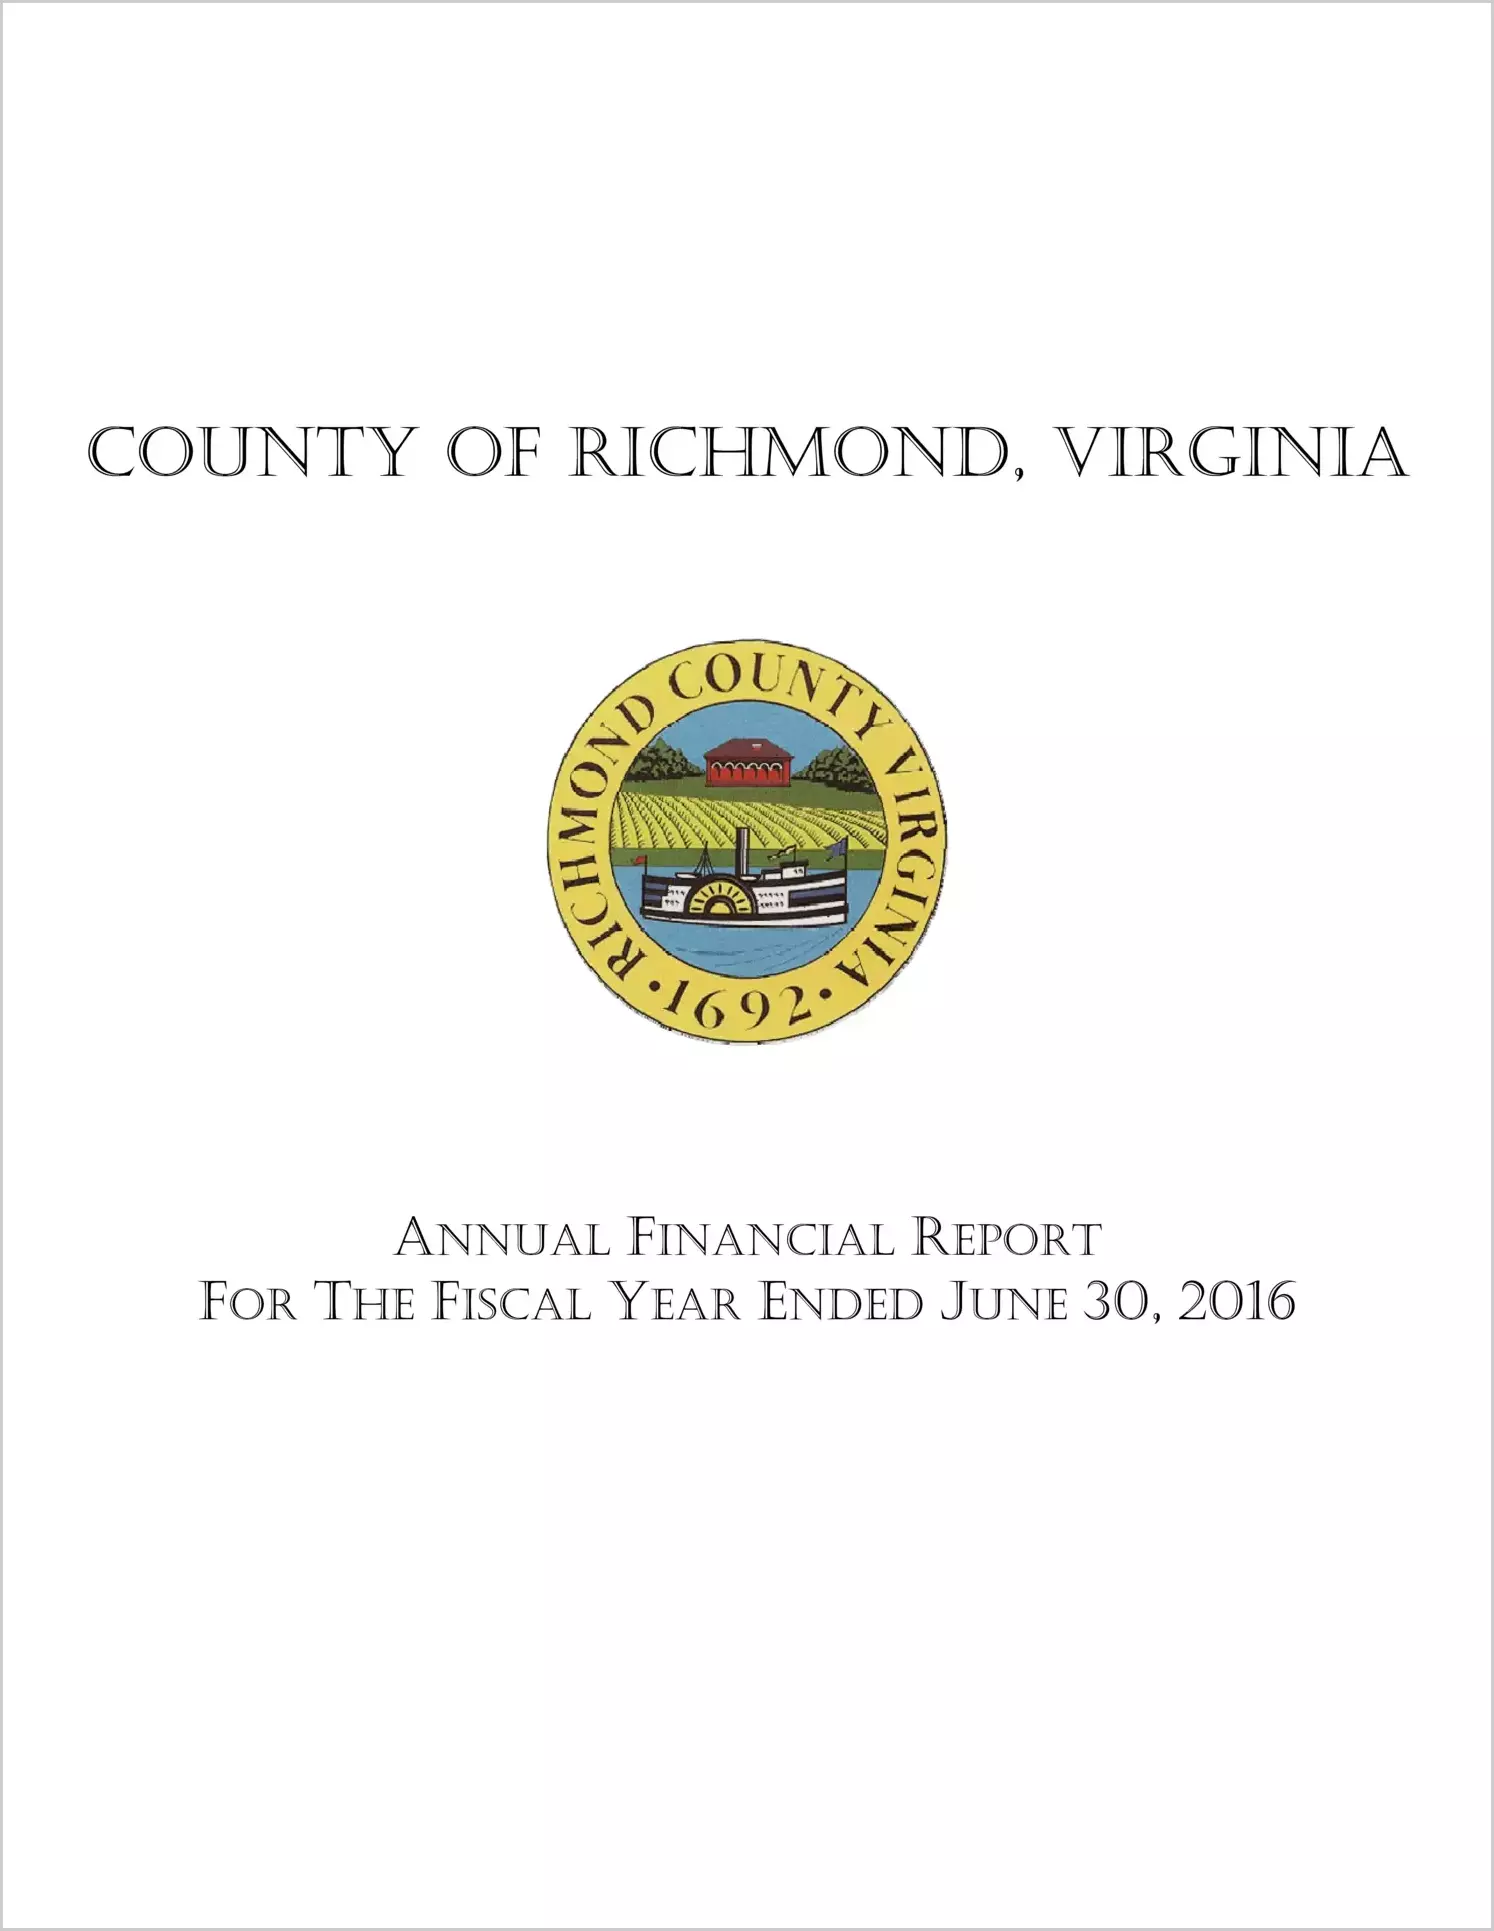 2016 Annual Financial Report for County of Richmond